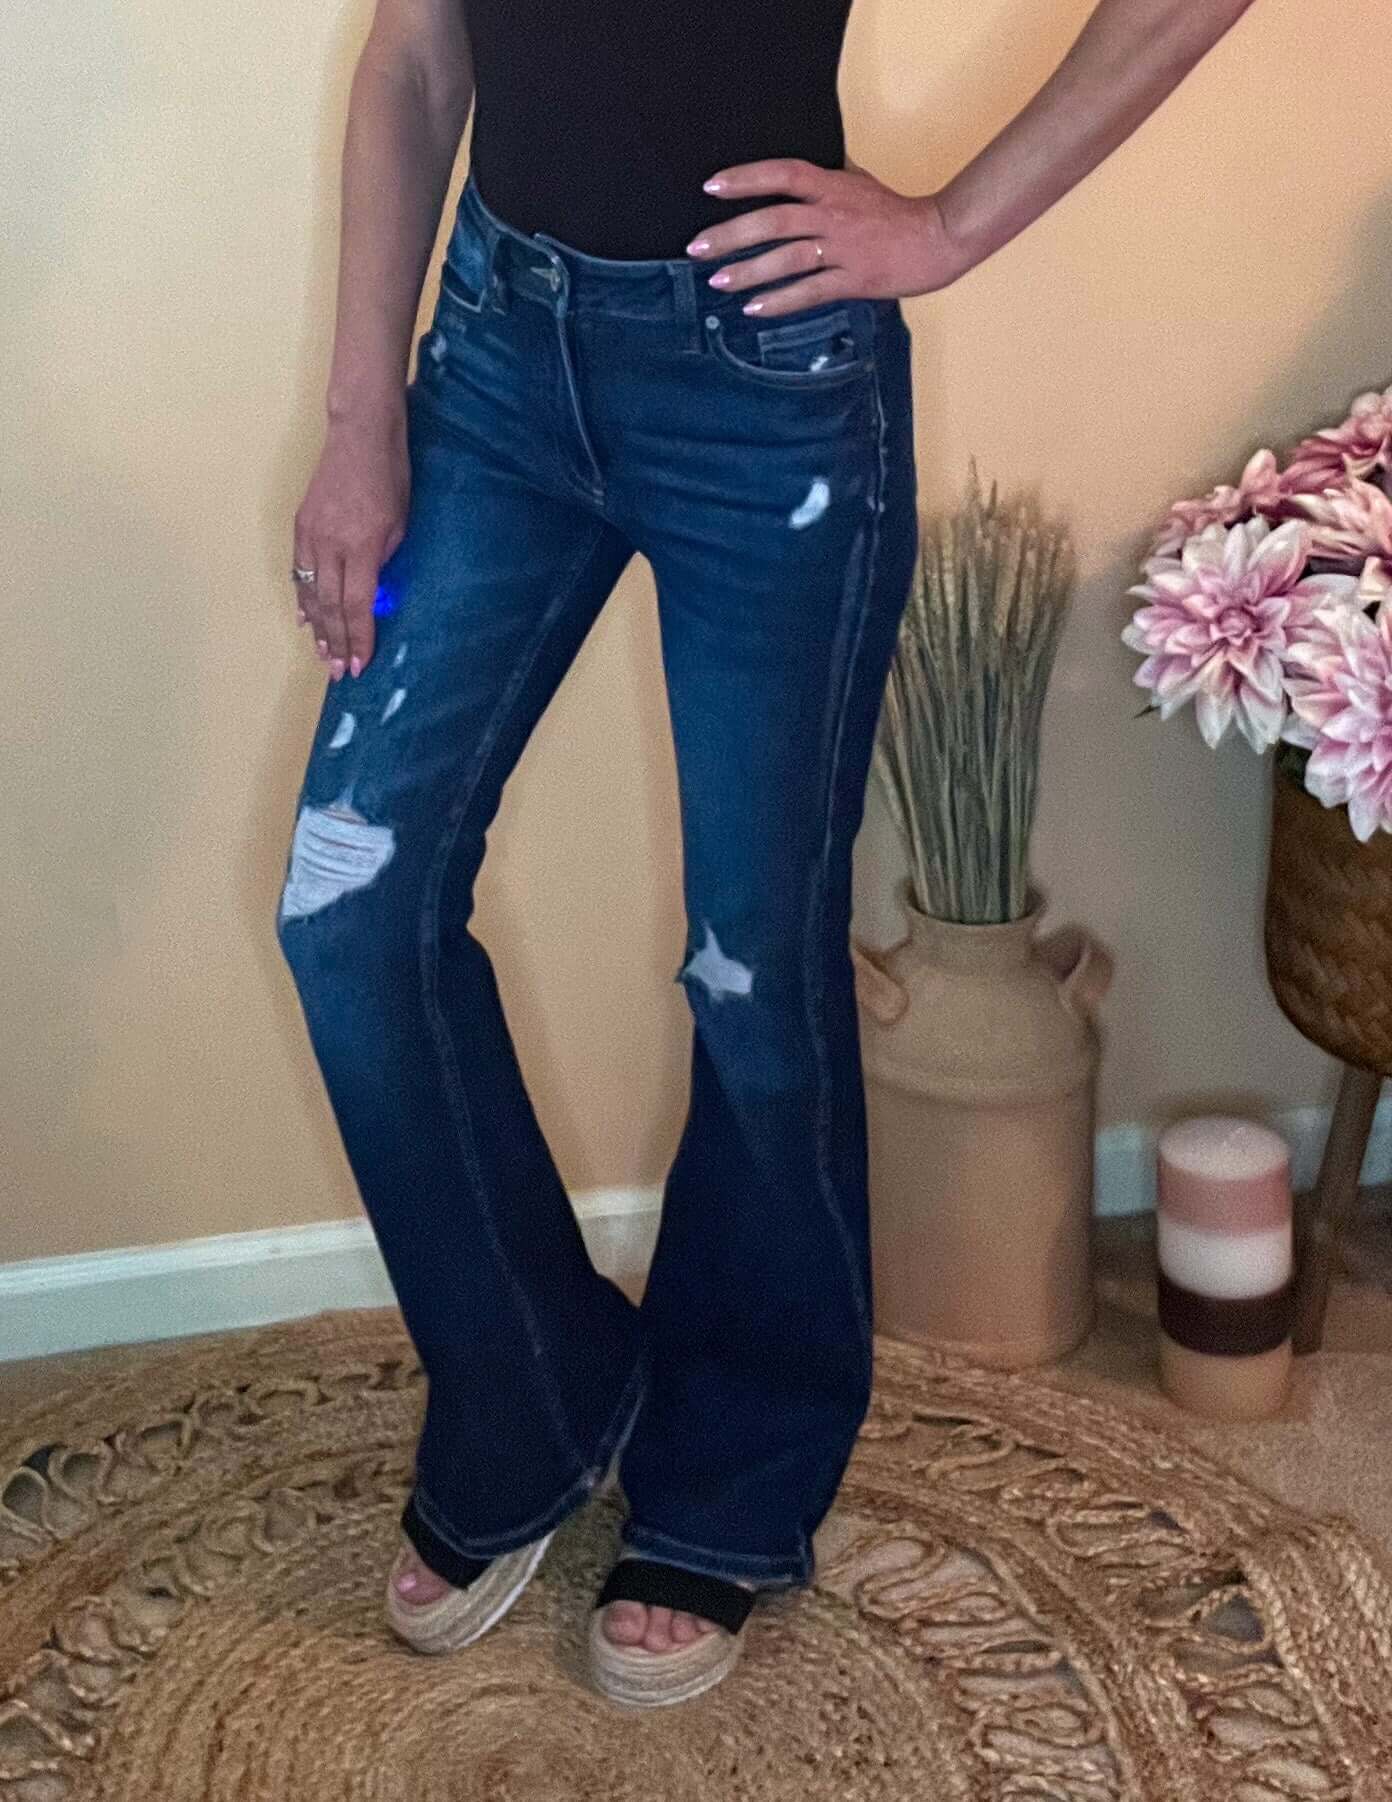 Pants 33" Inseam, 5 pocket design, 9.5" rise, Boutiques with KanCan Jeans, button-zip closure, button-zip fly, clothing, Denim, flare jeans, high rise jeans, jeans, KanCan, KanCan Jeans Boutique, KanCan Odie High Rise Flare Jeans, pants, single button fro